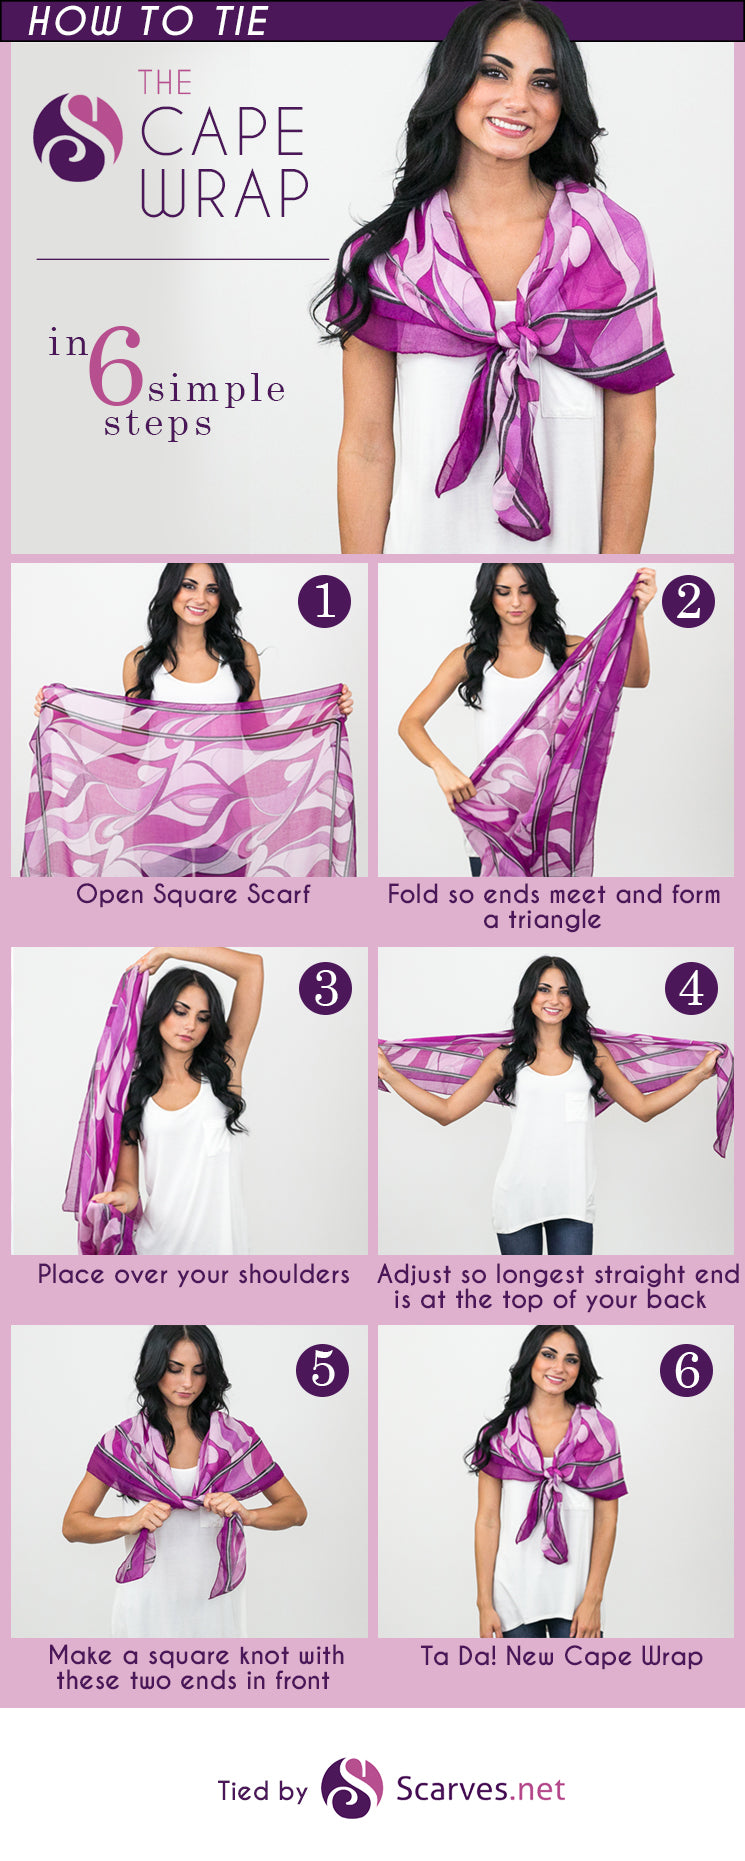 The Cape Wrap in 6 simple steps